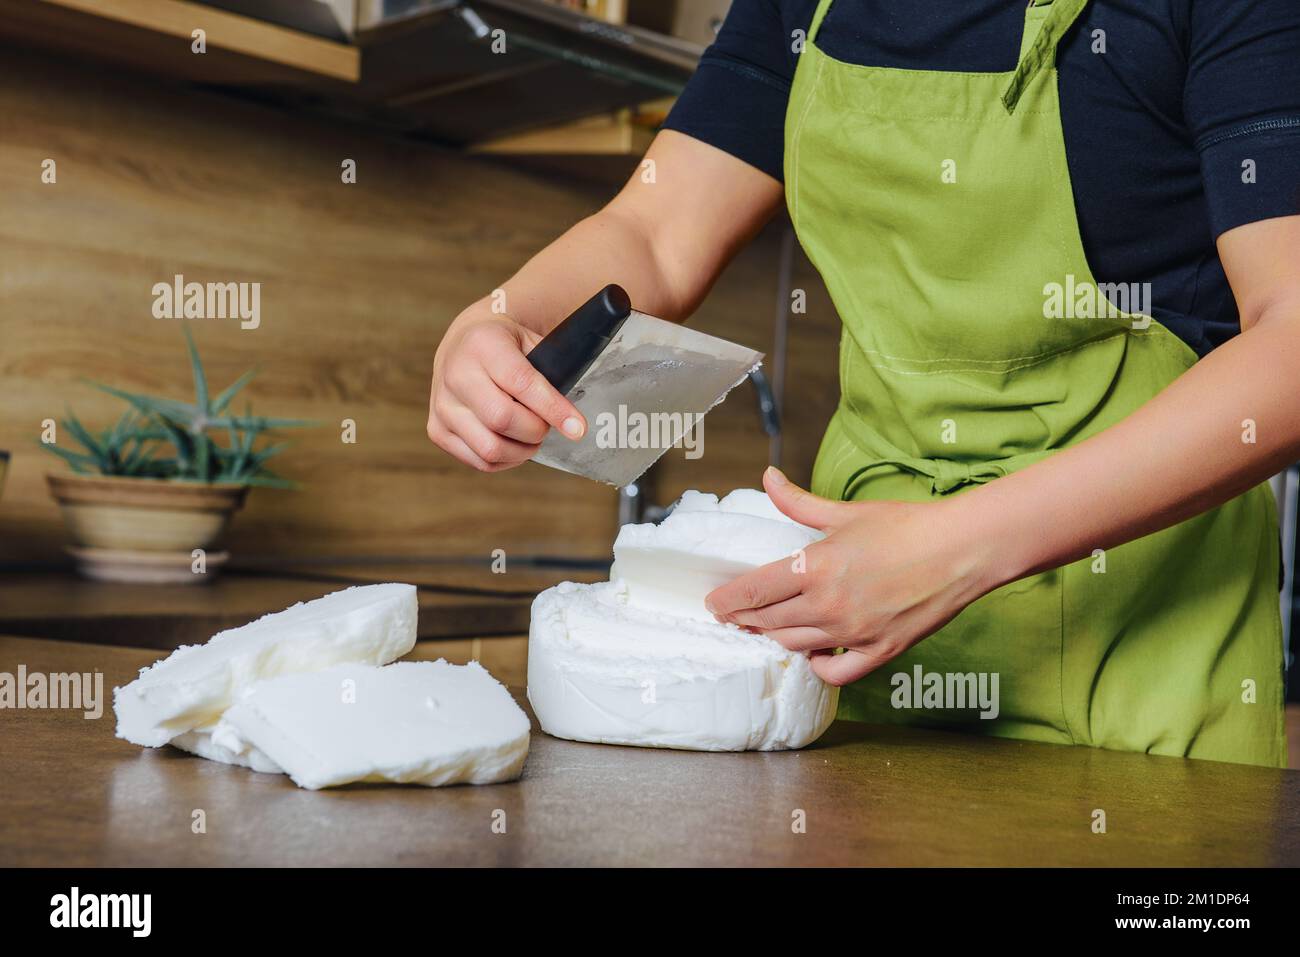 Unrecognisable woman preparing white fondant for cake decorating, hands detail. DIY, sequence, step by step, part of series. Stock Photo